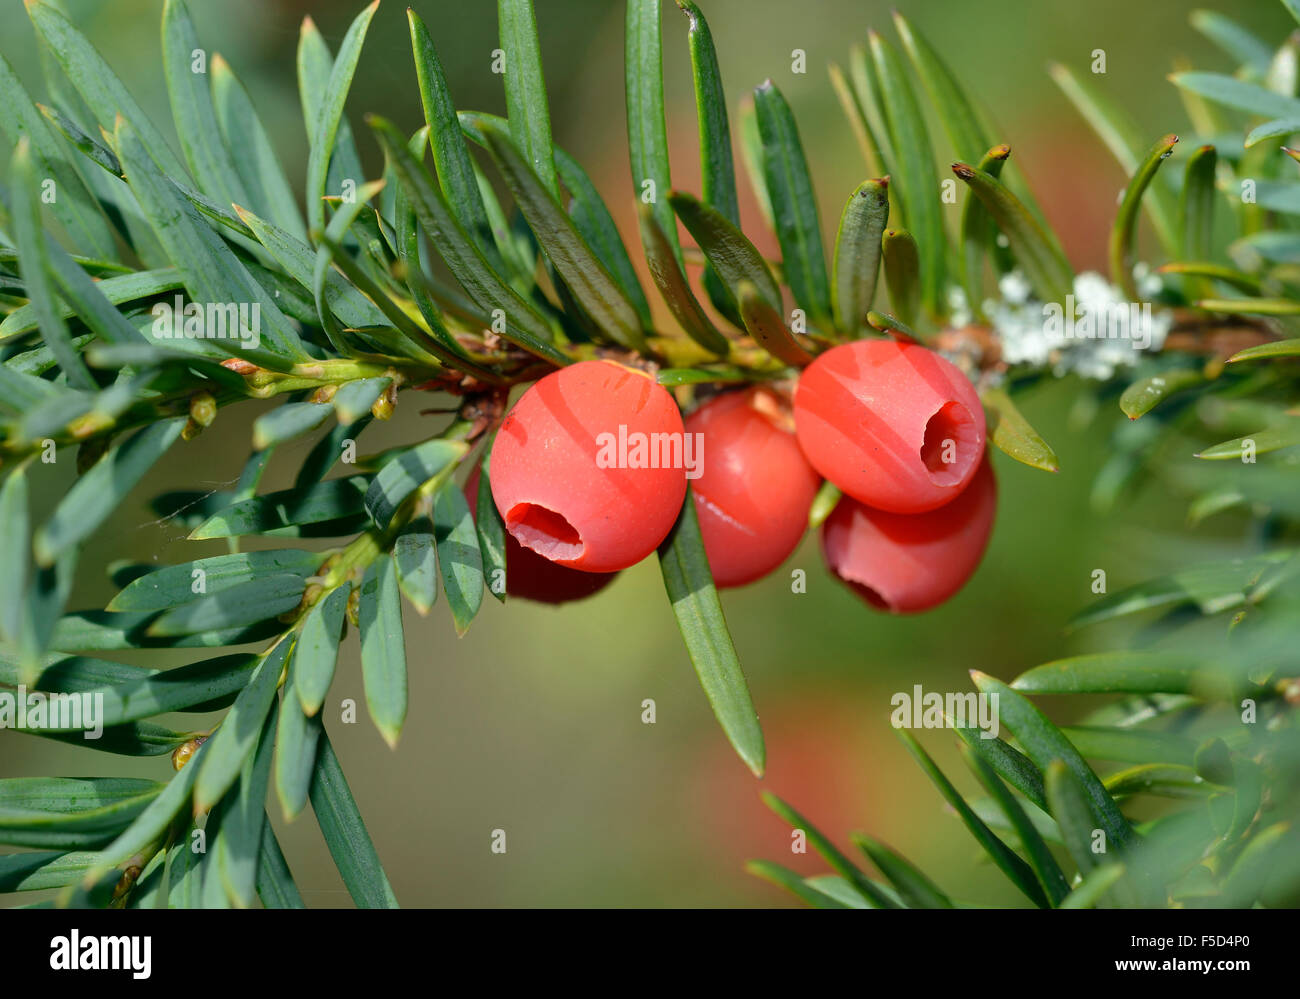 Yew - Taxus baccata Red Berries on branch Stock Photo